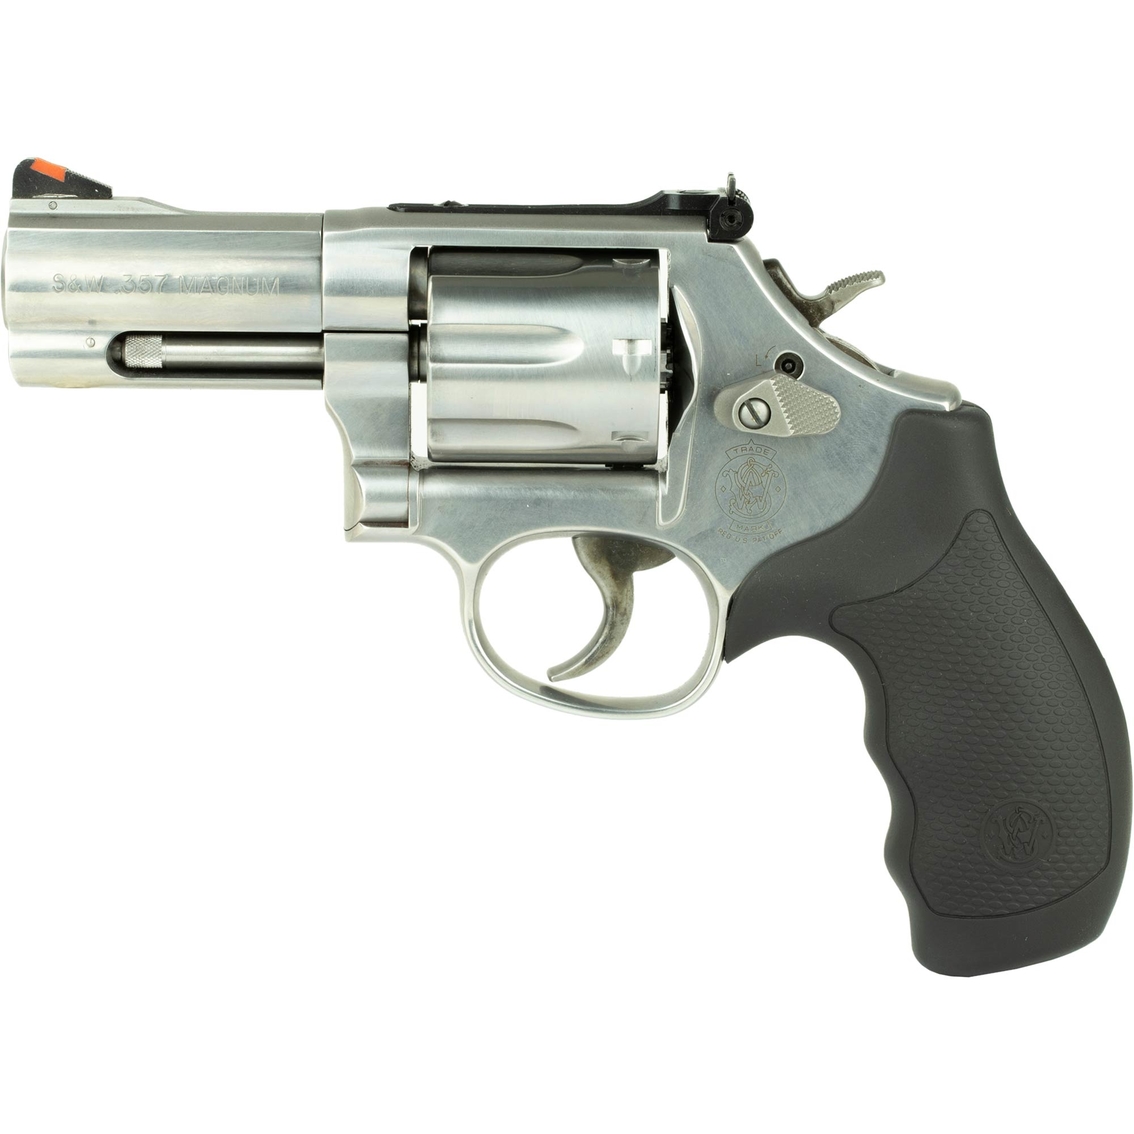 S&W 686 Plus 357 Mag 3 in. Barrel 7 Rnd Revolver Stainless Steel - Image 2 of 3